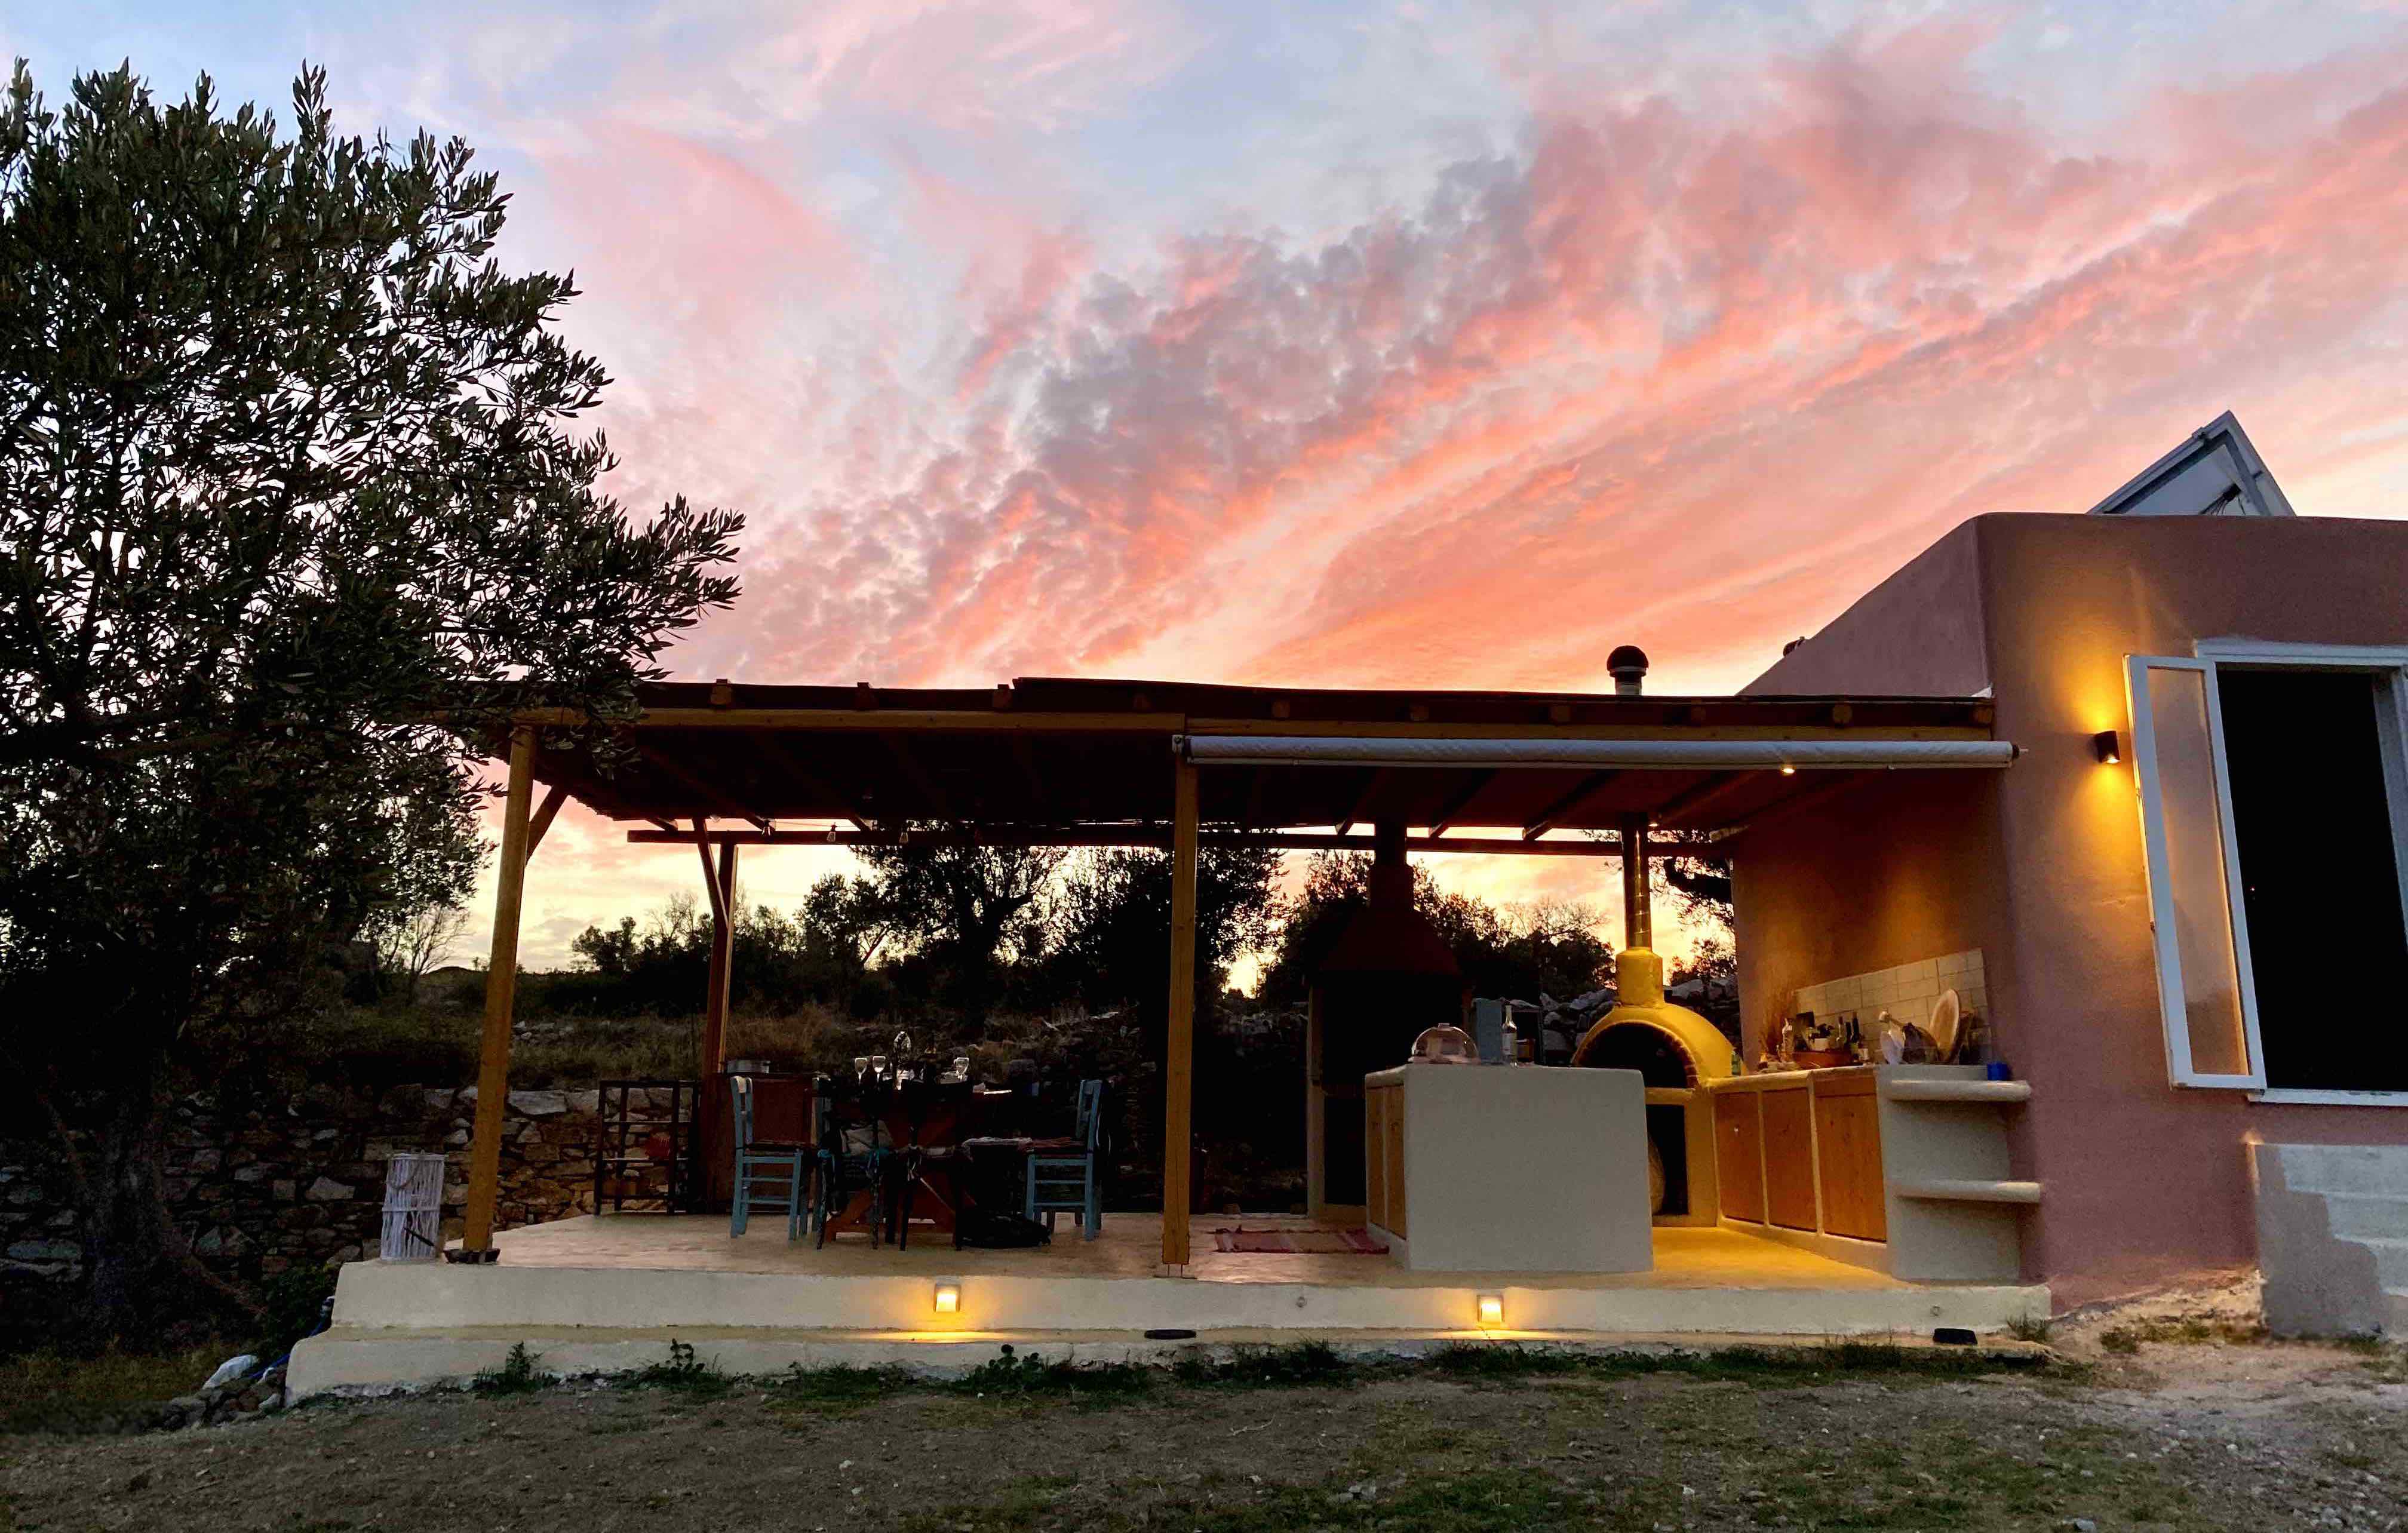 Sunset kitchen at the Naxos Cozy Nest, ideal place for private dinning, food & wine tasting, and yoga practice with healthy brunch